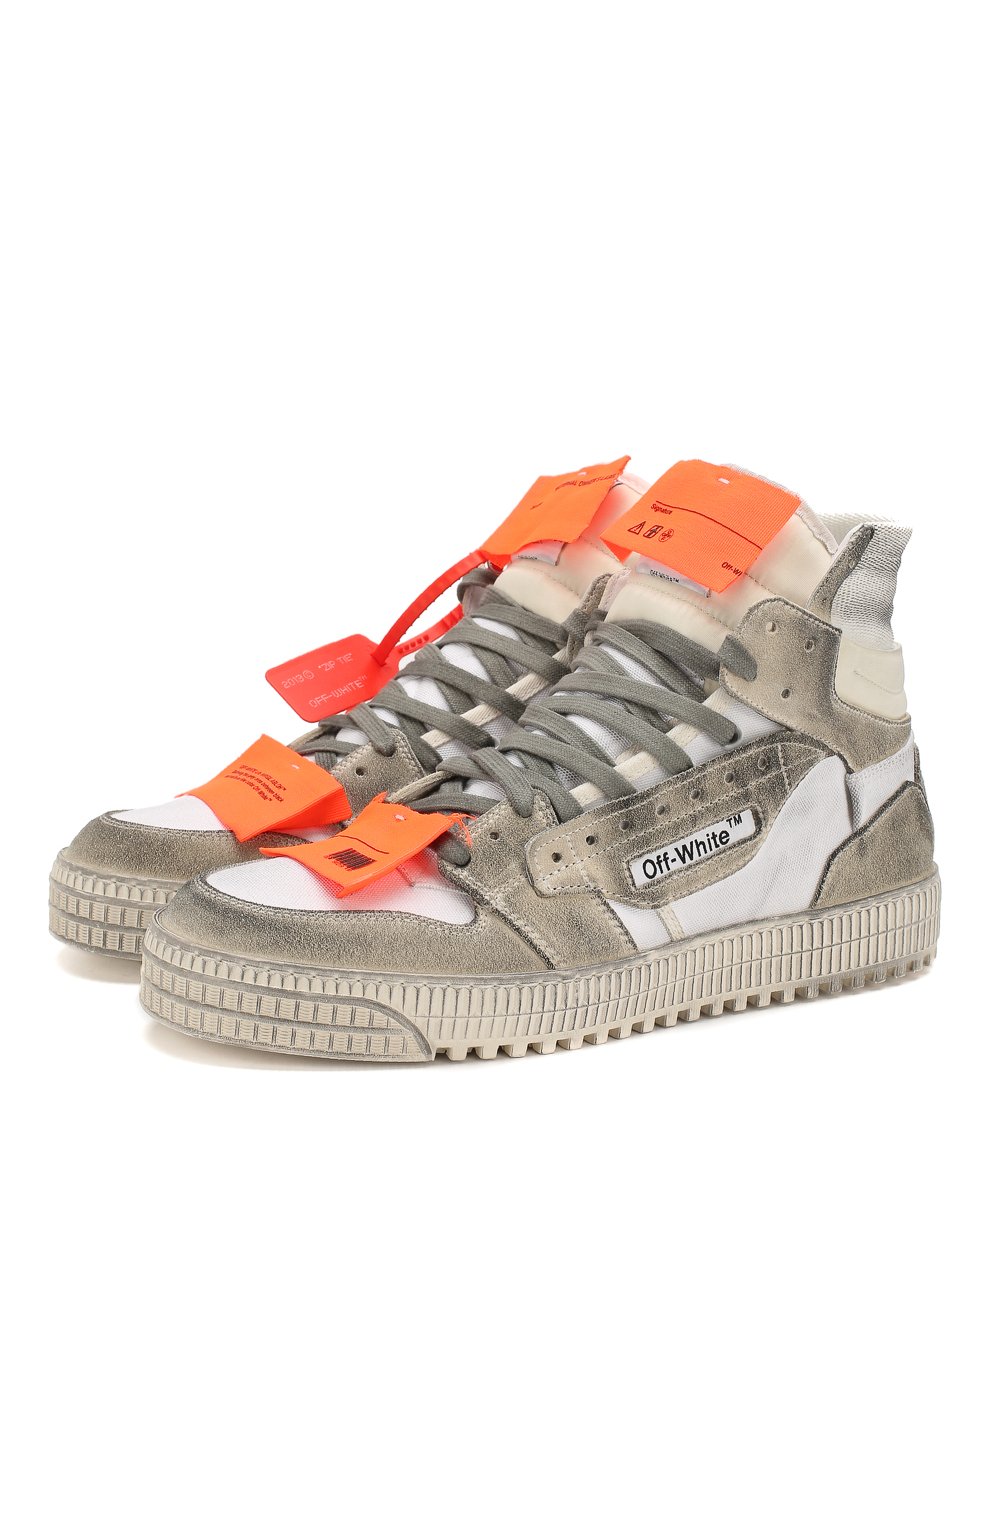 off white off court 3.0 grey